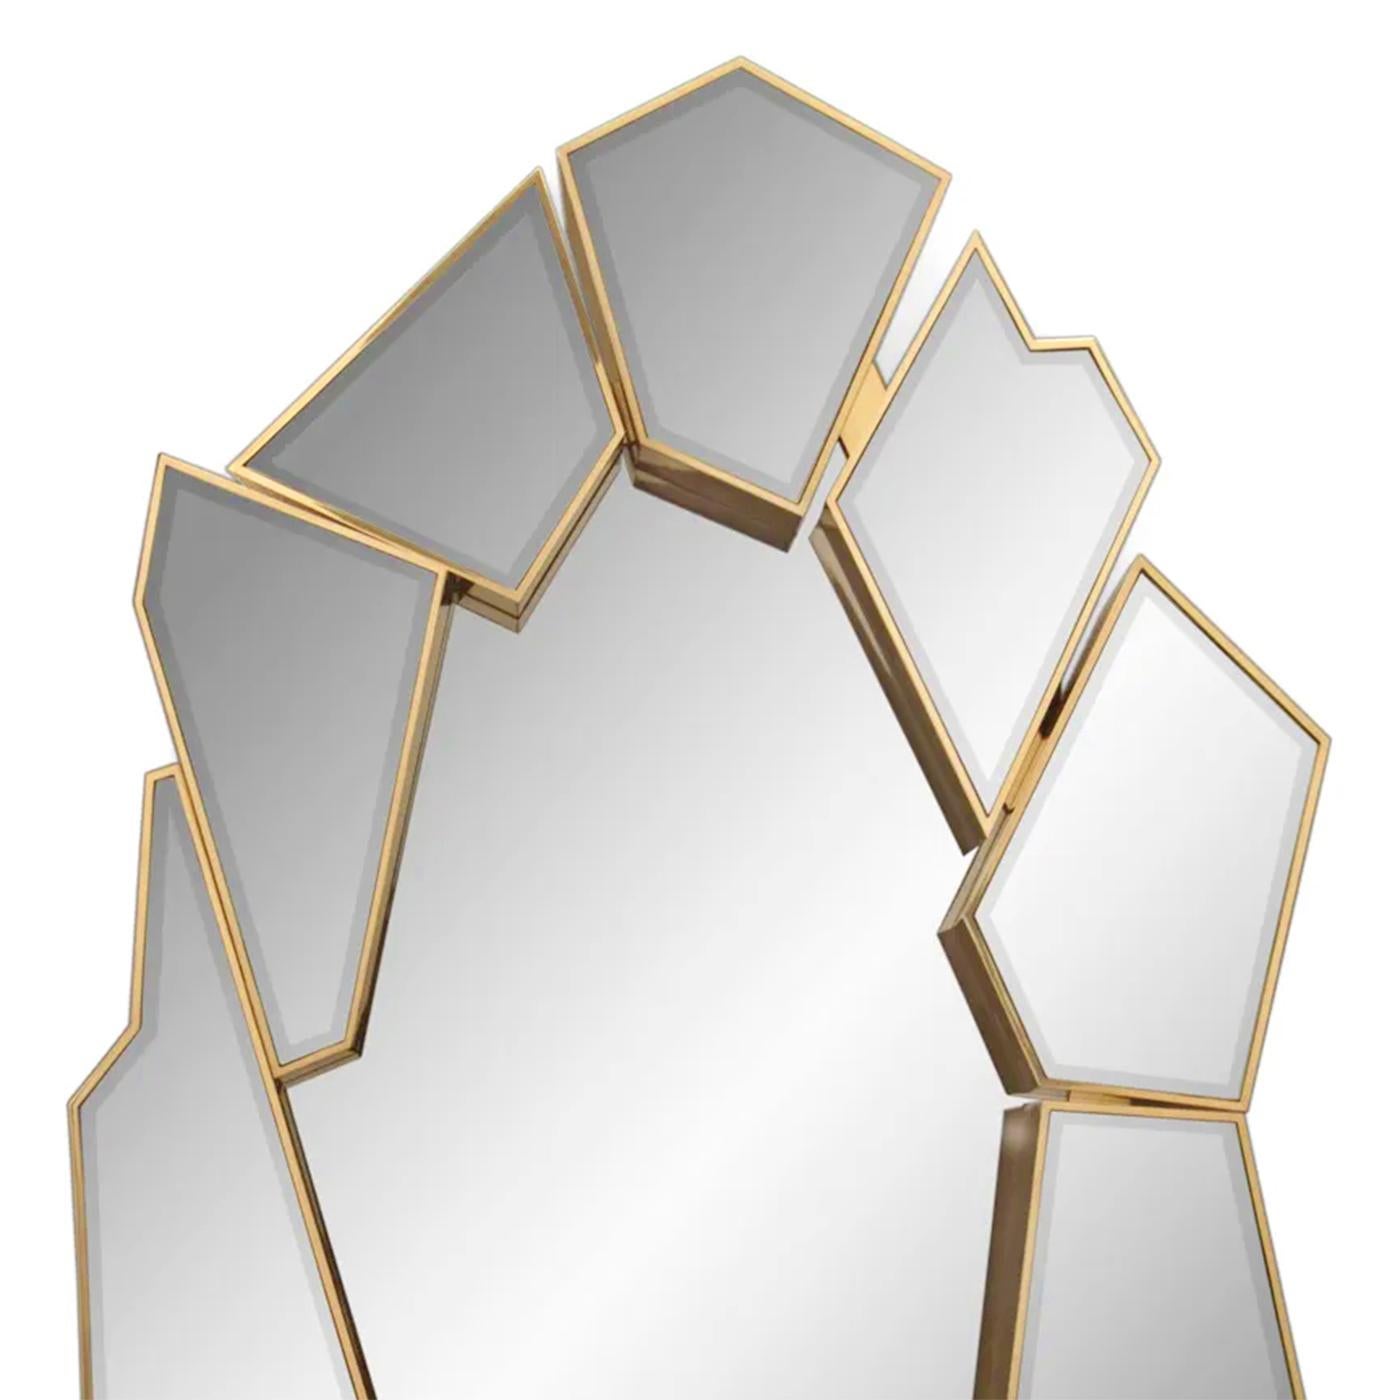 Mirror Livio High with structure in solid brass in polished finish
with frame's mirrors and center mirror in bevelled smocked glass.